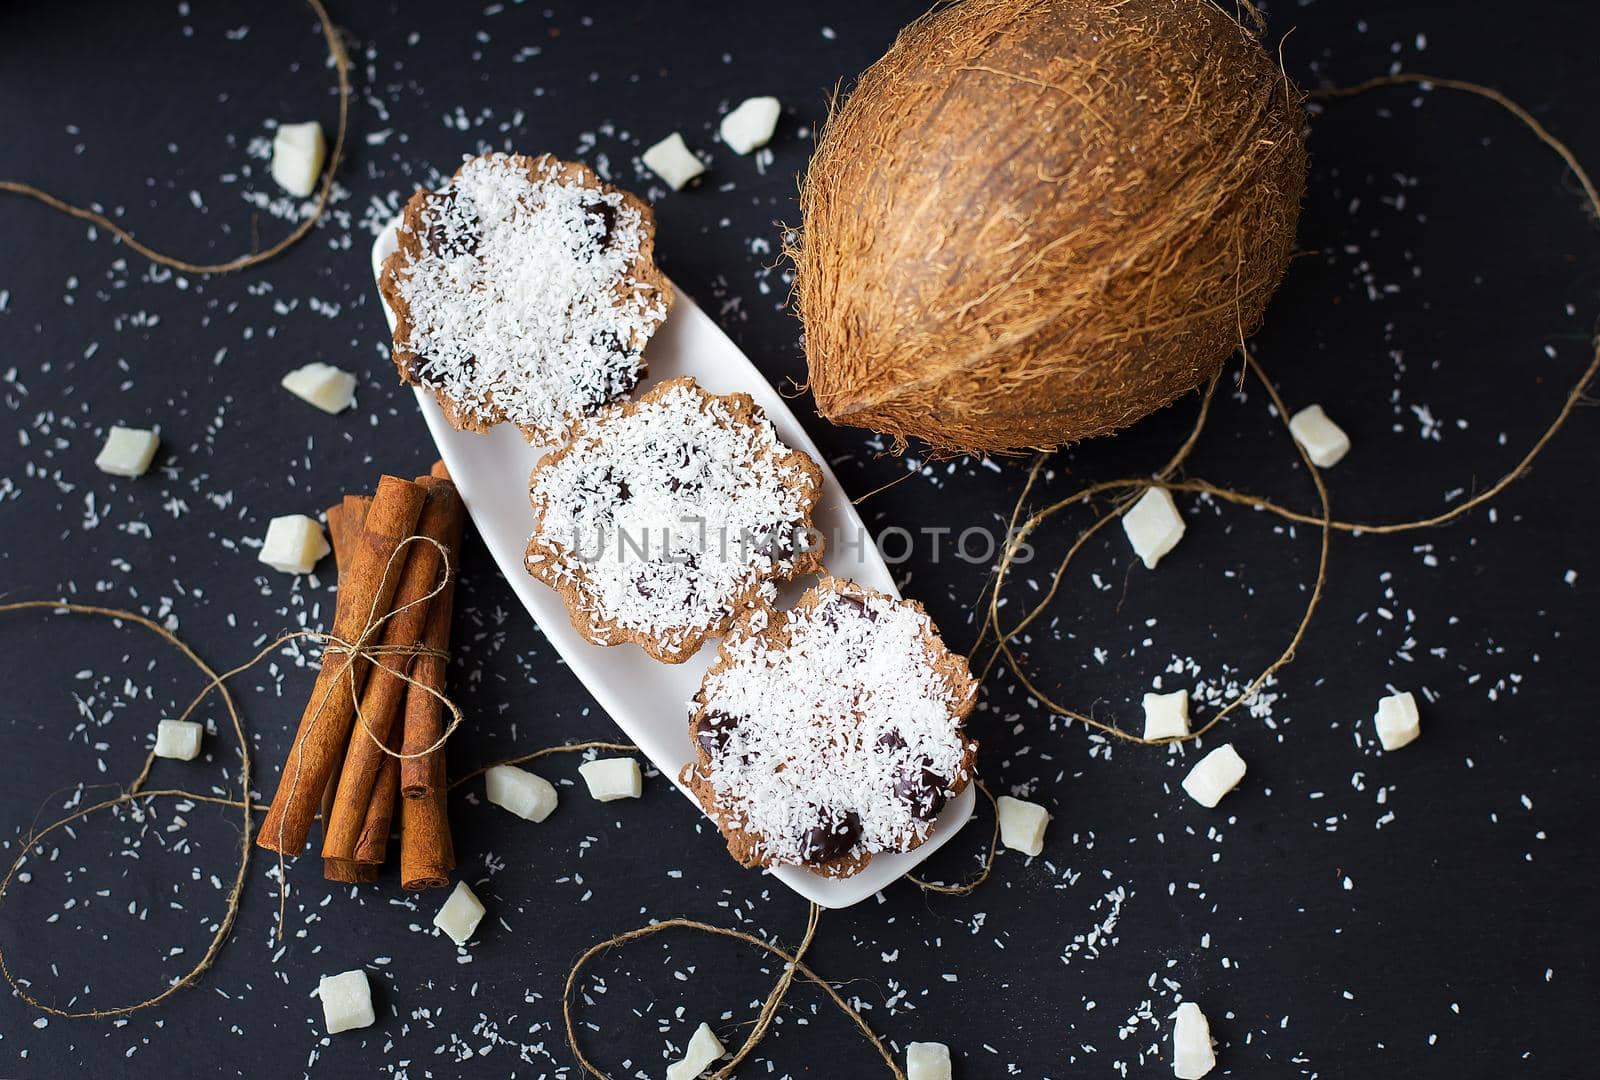 coconut muffins on a black background with cinnamon sticks and whole coconut slices and candied